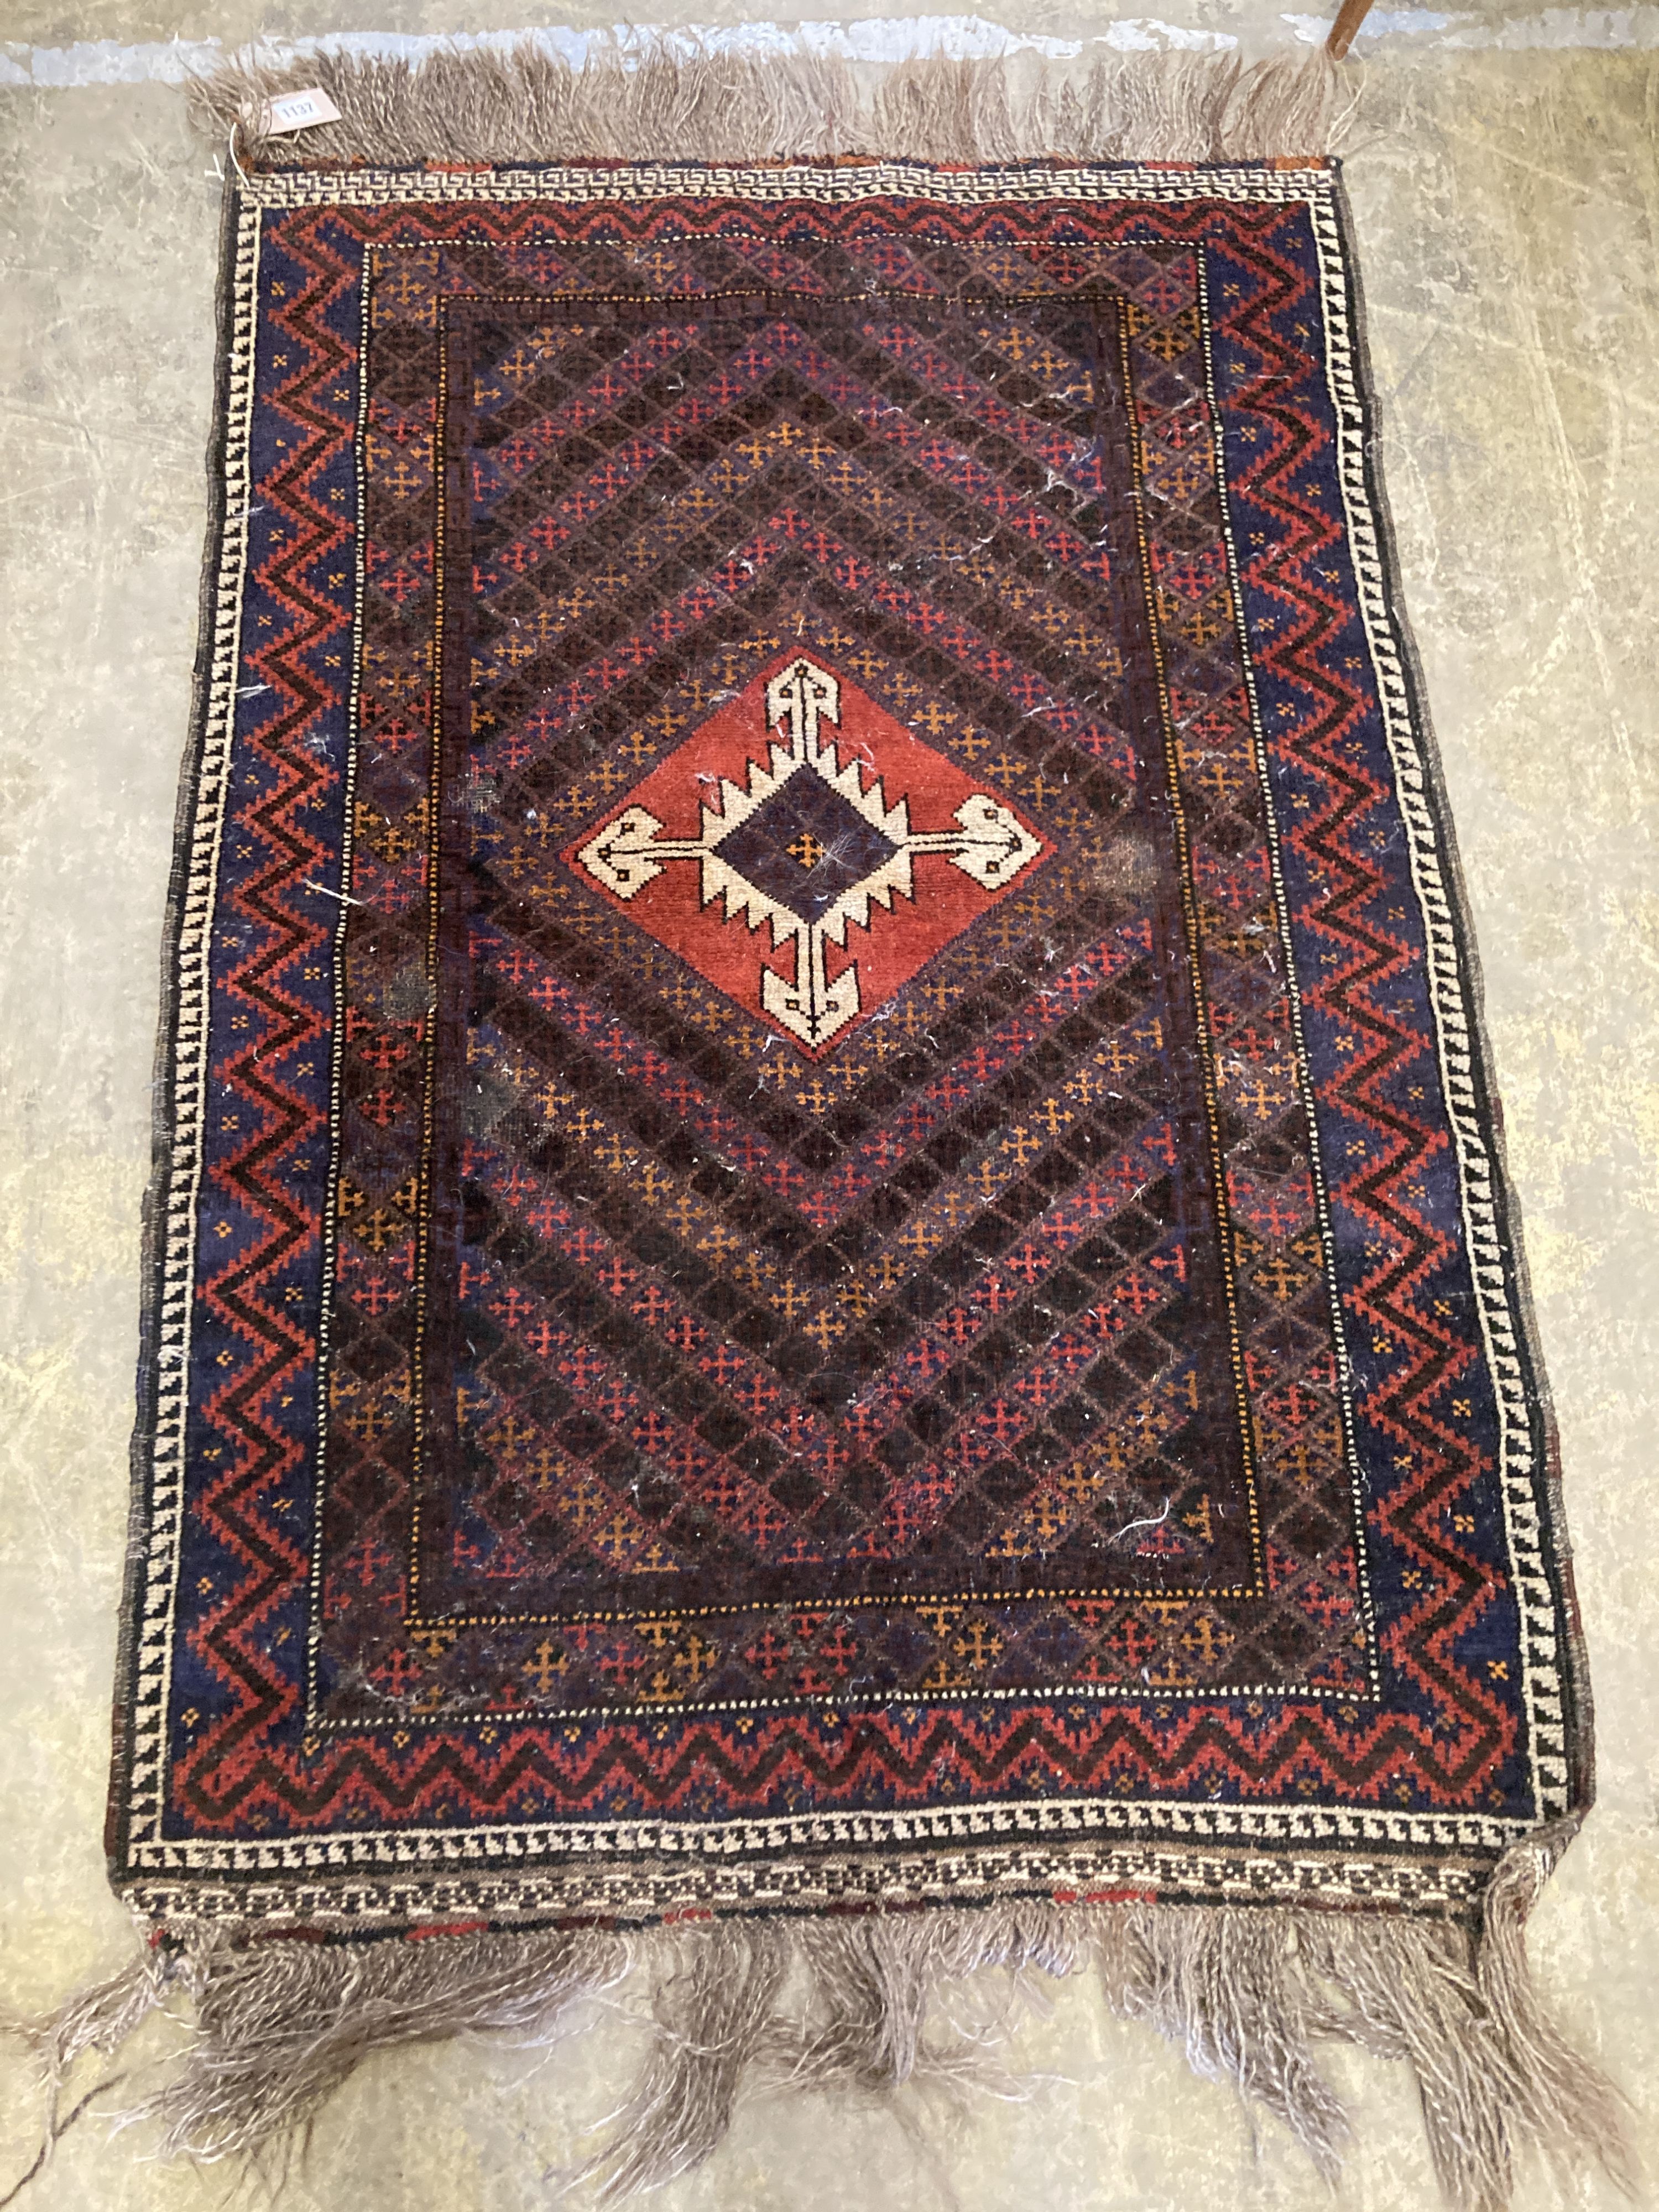 Two small Belouchi red ground rugs and two Kilim style rugs, 112 x 92.5cm and similar - Image 2 of 5